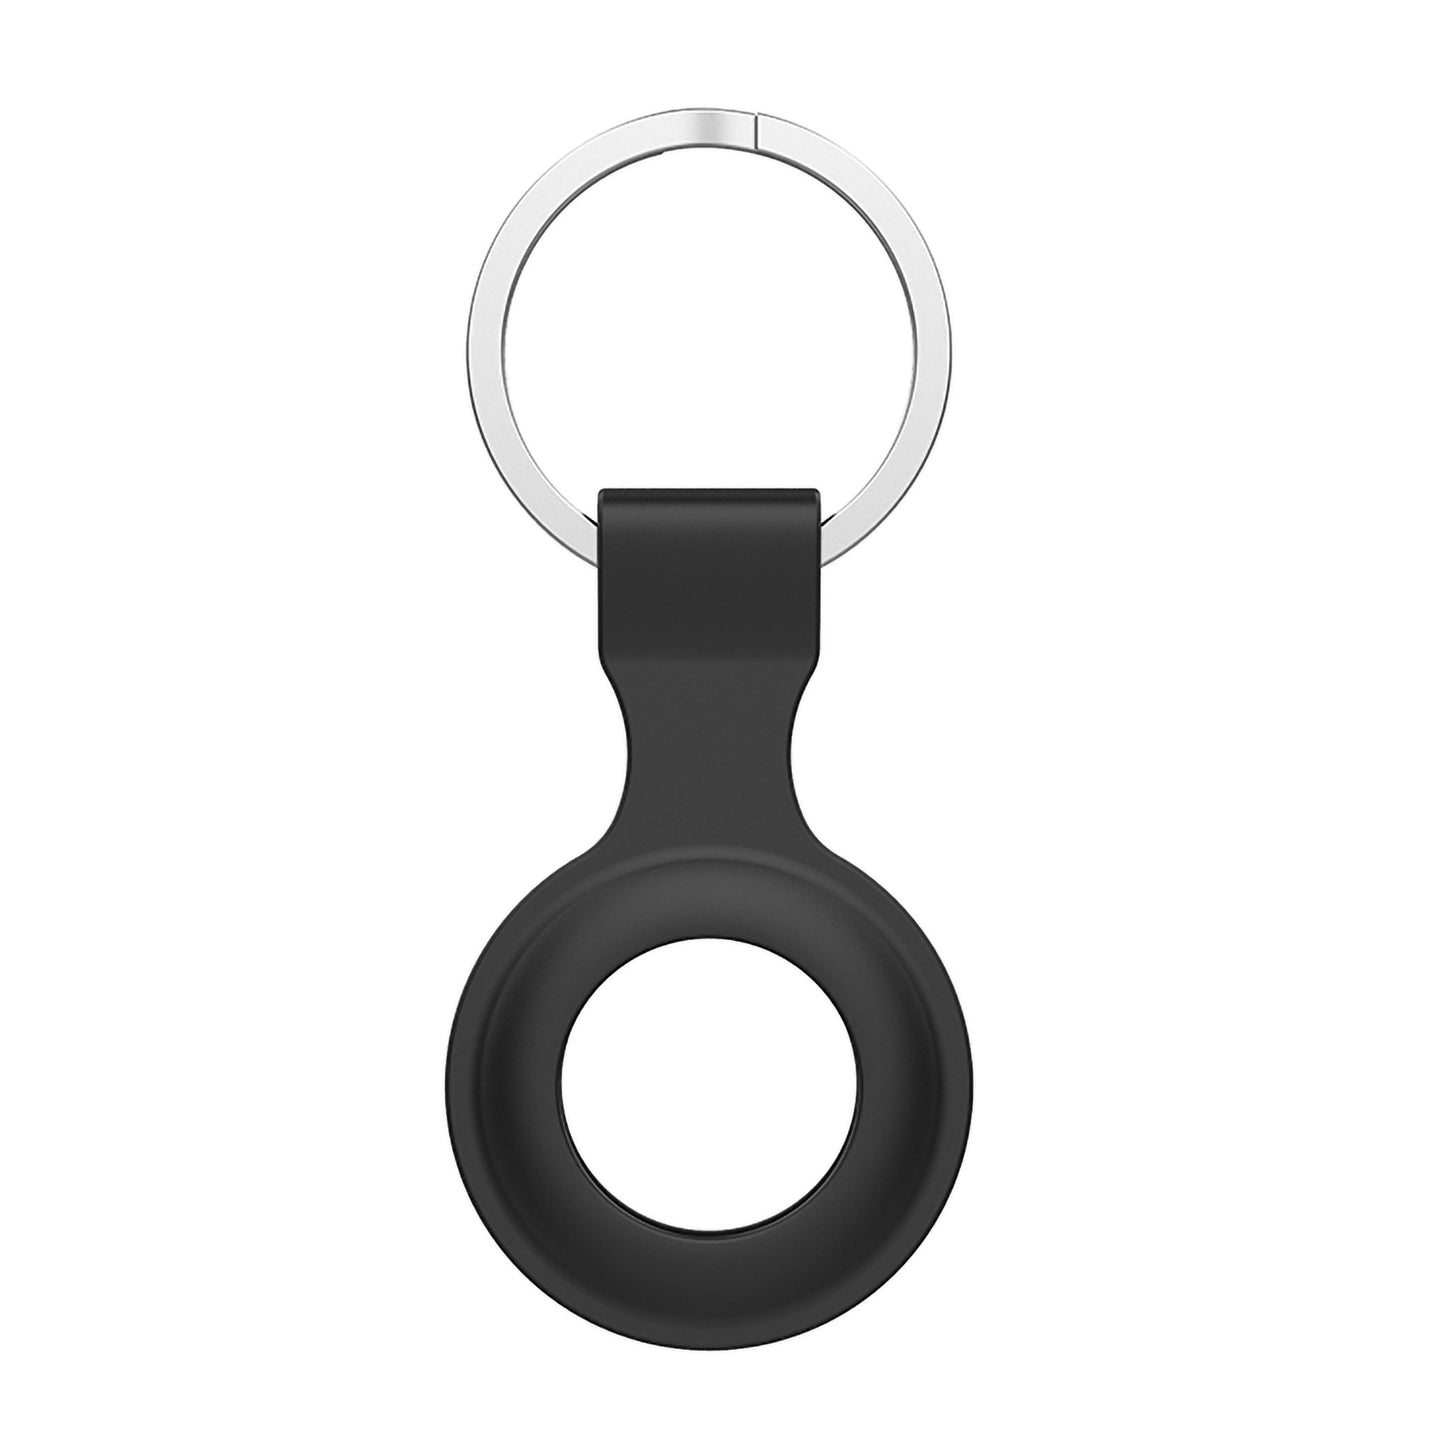 [1 pack] MEZON Black Silicone Protective Case Holder for Apple AirTag Tracker with Keychain Ring (Silicone Hole, Black)